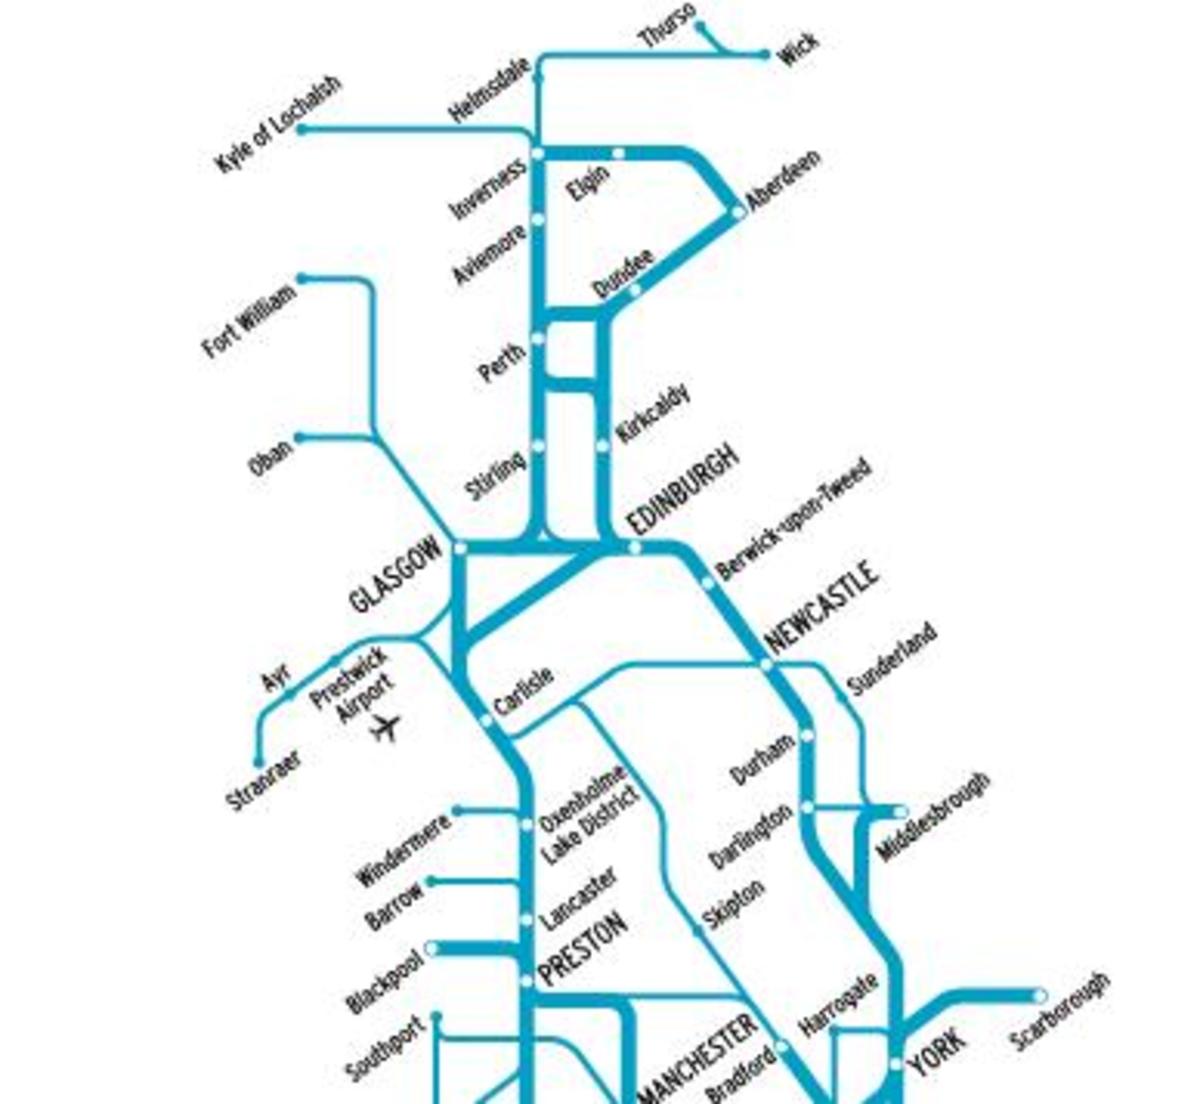 Rail links in the North of England and Scotland. King's Cross-Darlington, Darlington-Saltburn and coastal buses are the easiest if you do not have your own transport. Or rent a car at main stations (York, Darlington, Middlesbrough)